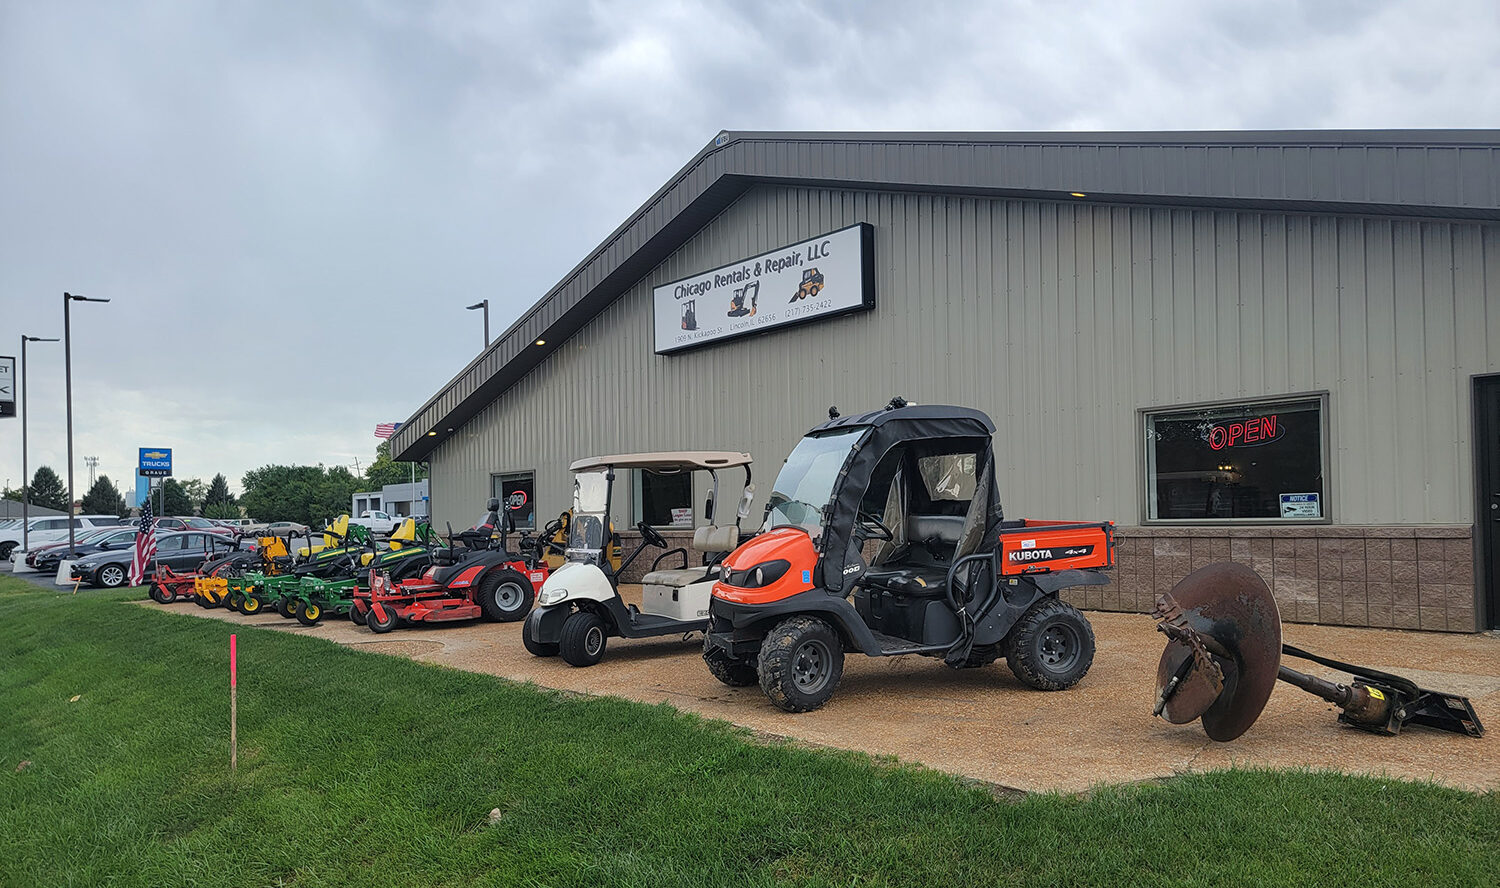 Chicago Rental & Repair exterior showcasing larger lawn and landscaping equipment available for rent - Lincoln, IL